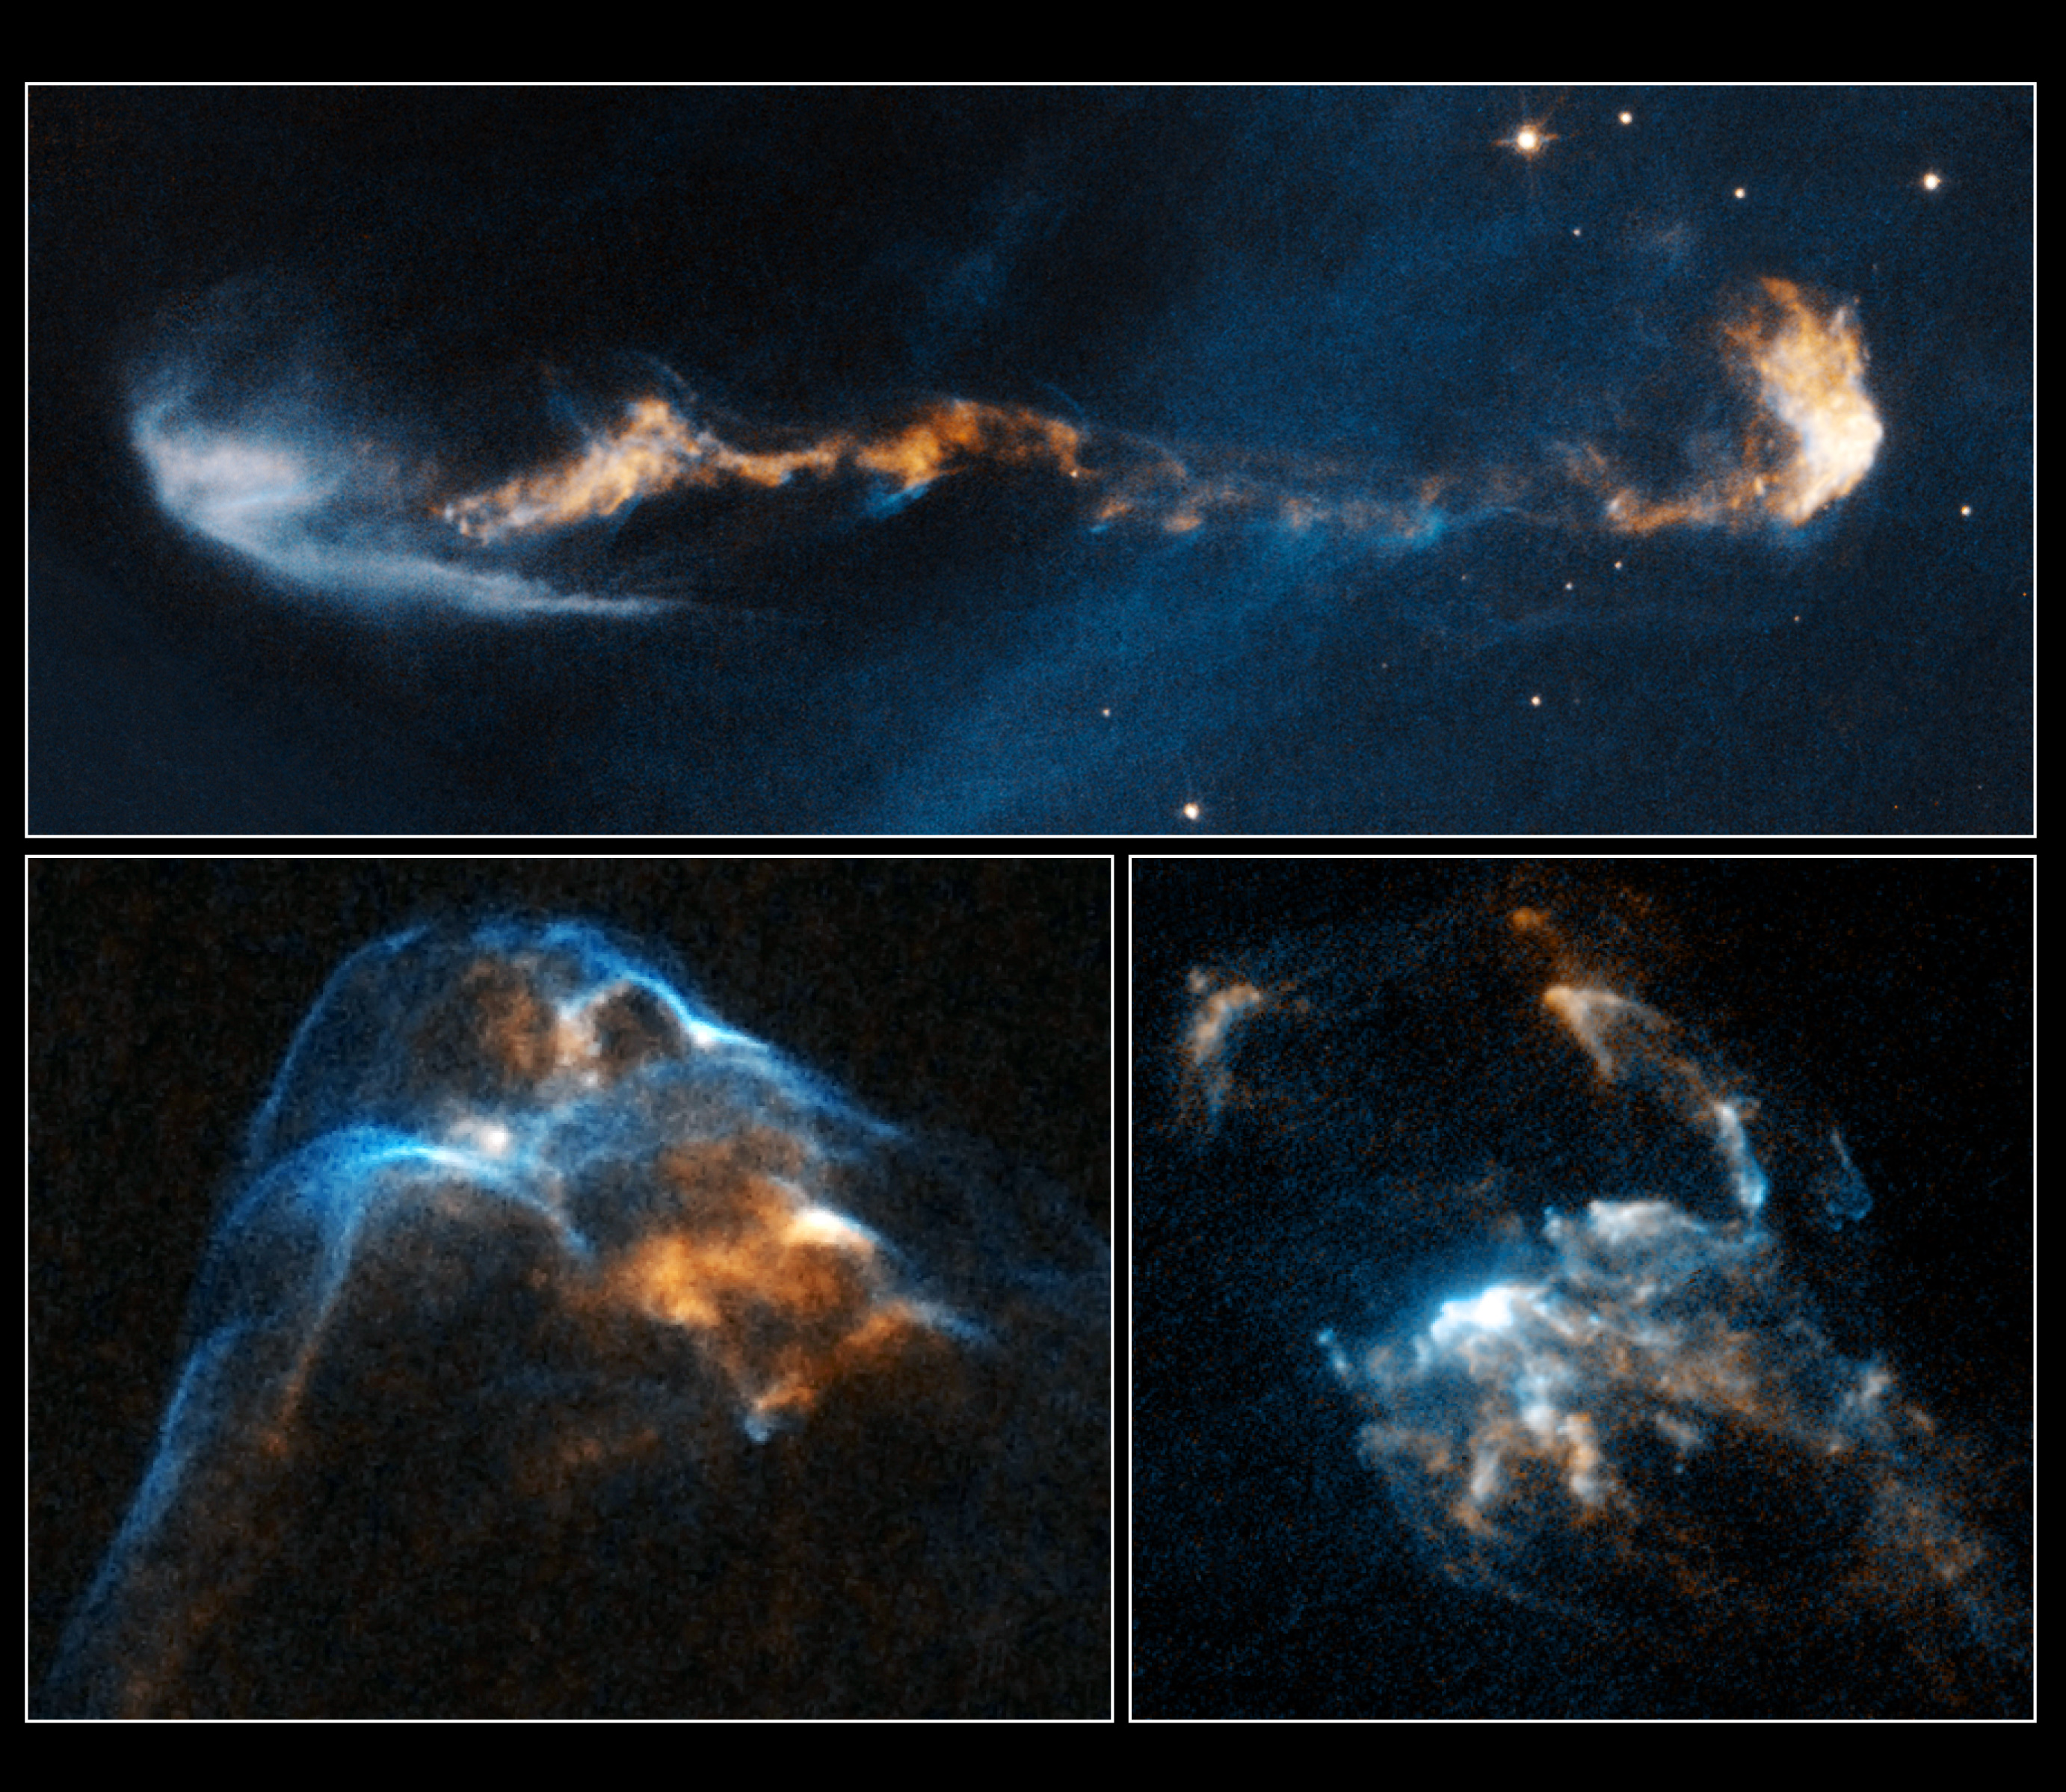 <span style="font-size:16px;position:relative;top:-50px">[Depicts: HH 2, HH 34, HH 47, Copyright: NASA, ESA, and P. Hartigan (Rice University)](http://sci.esa.int/hubble/49098-stellar-jets-hh-47-hh-34-and-hh-2/)</span>